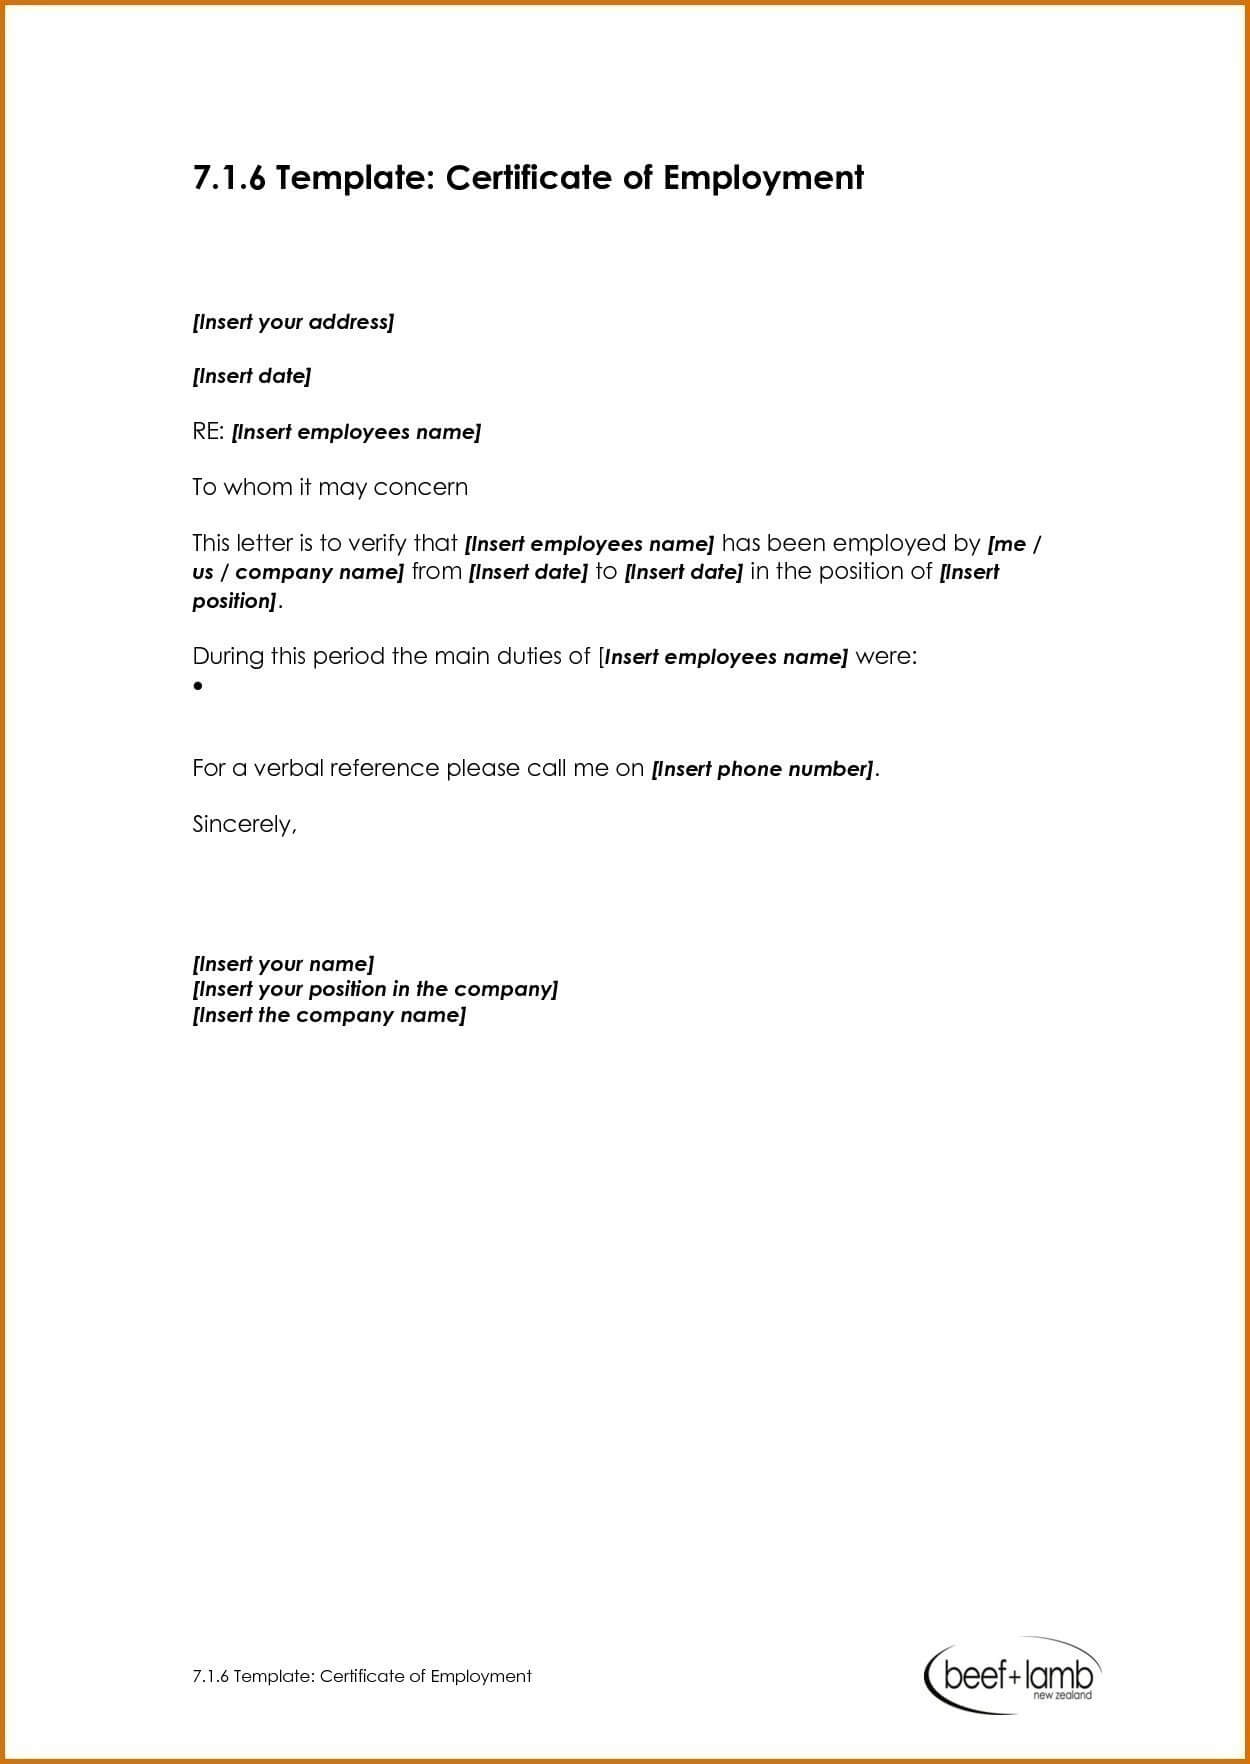 005 Certificate Of Employment Template Remarkable Ideas Free Within Certificate Of Employment Template